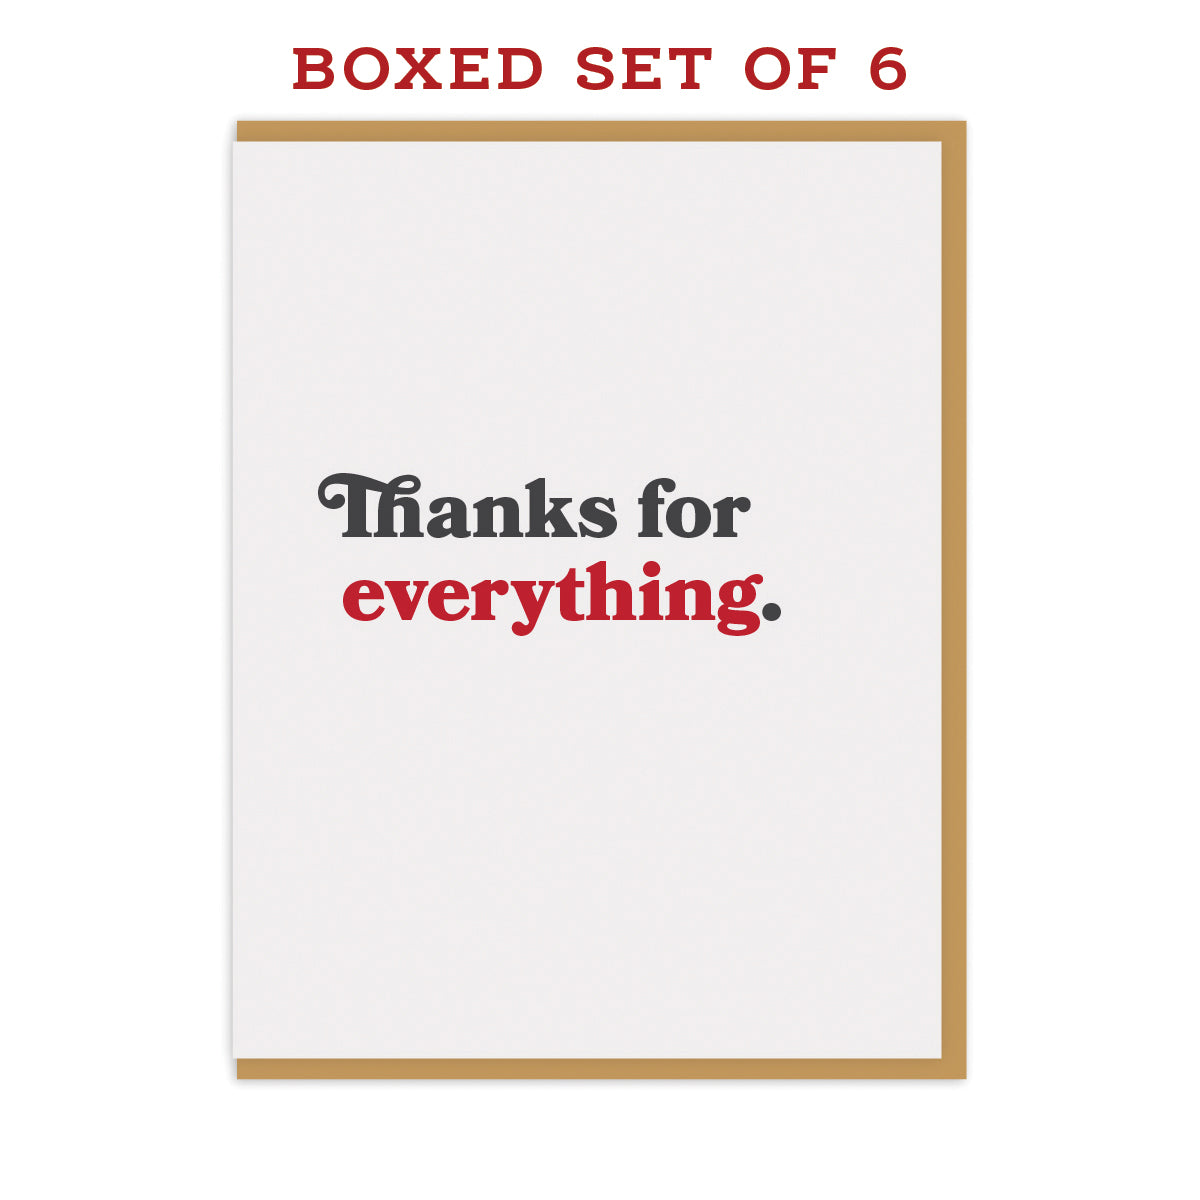 Thanks for everything. - Boxed Set of 6